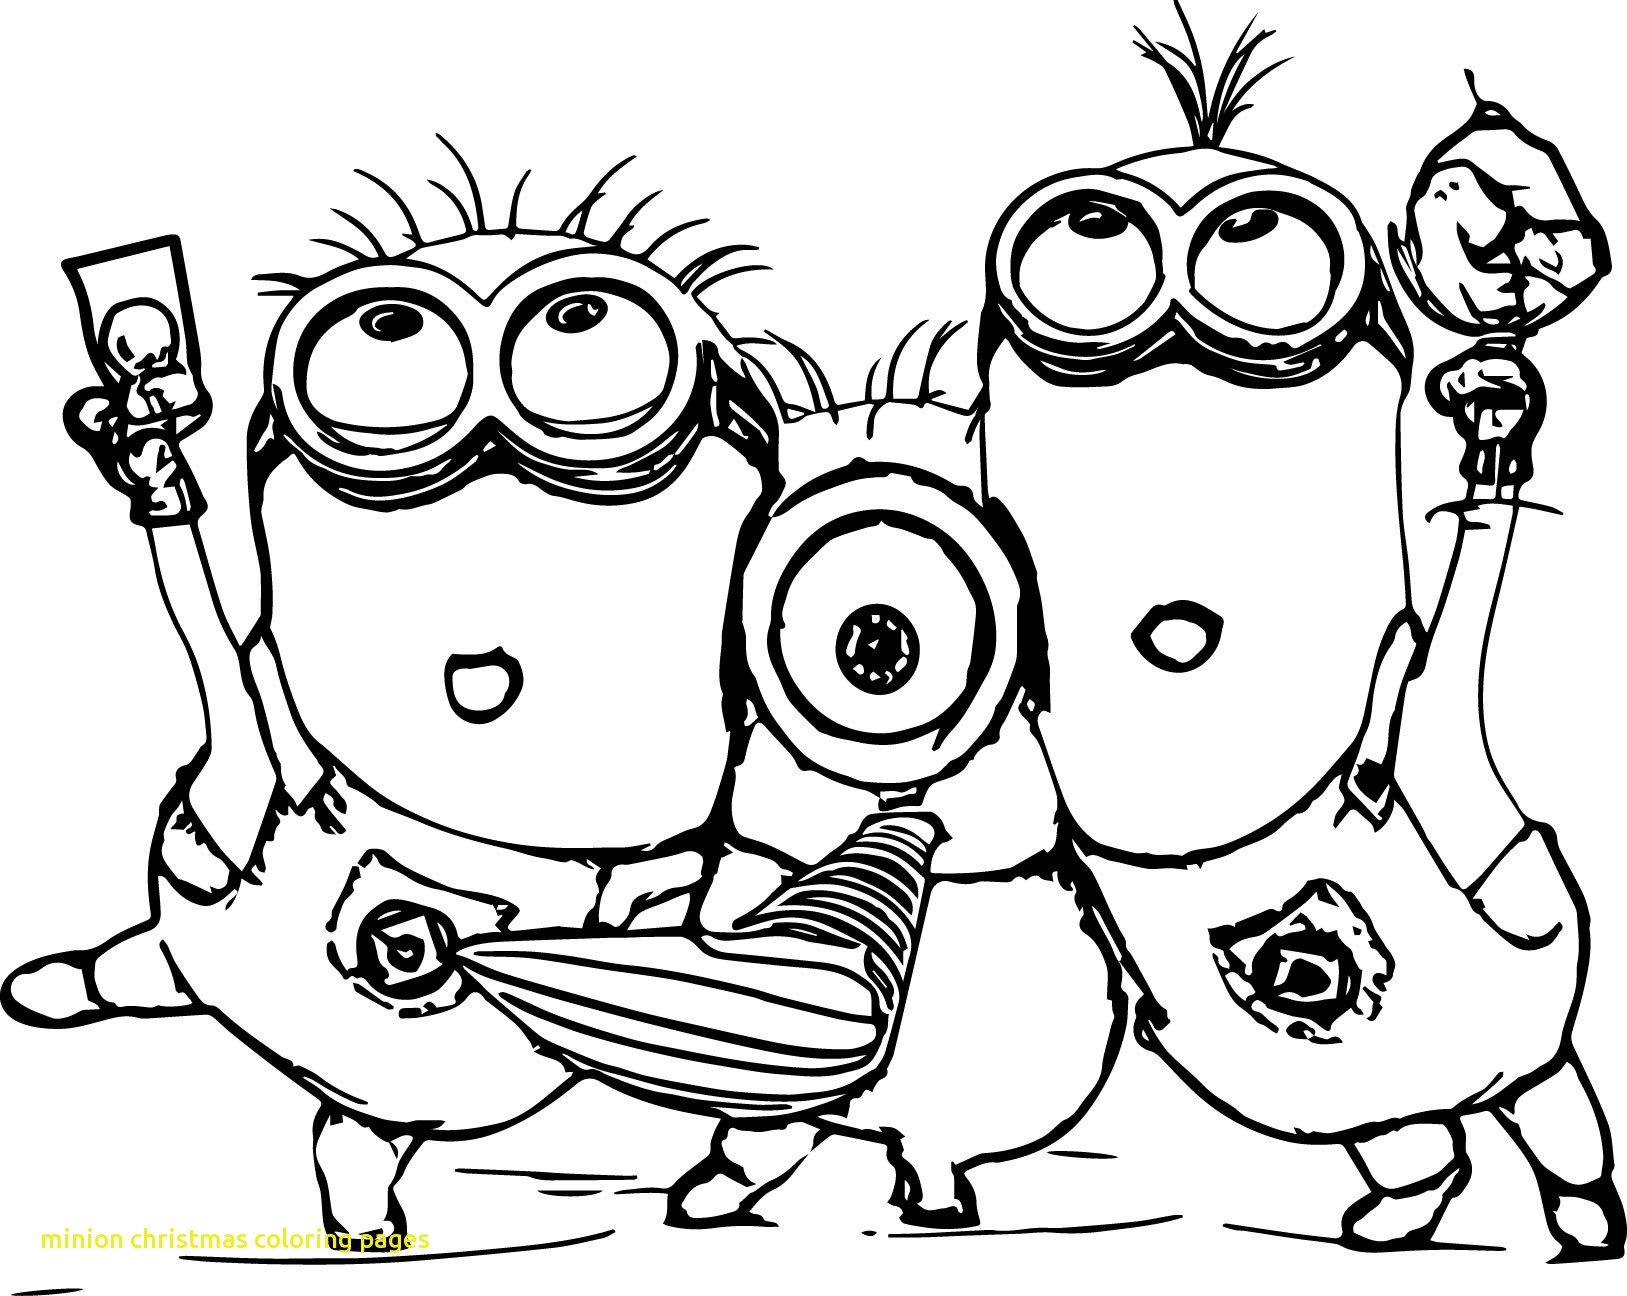 minion christmas coloring pages at getcolorings  free